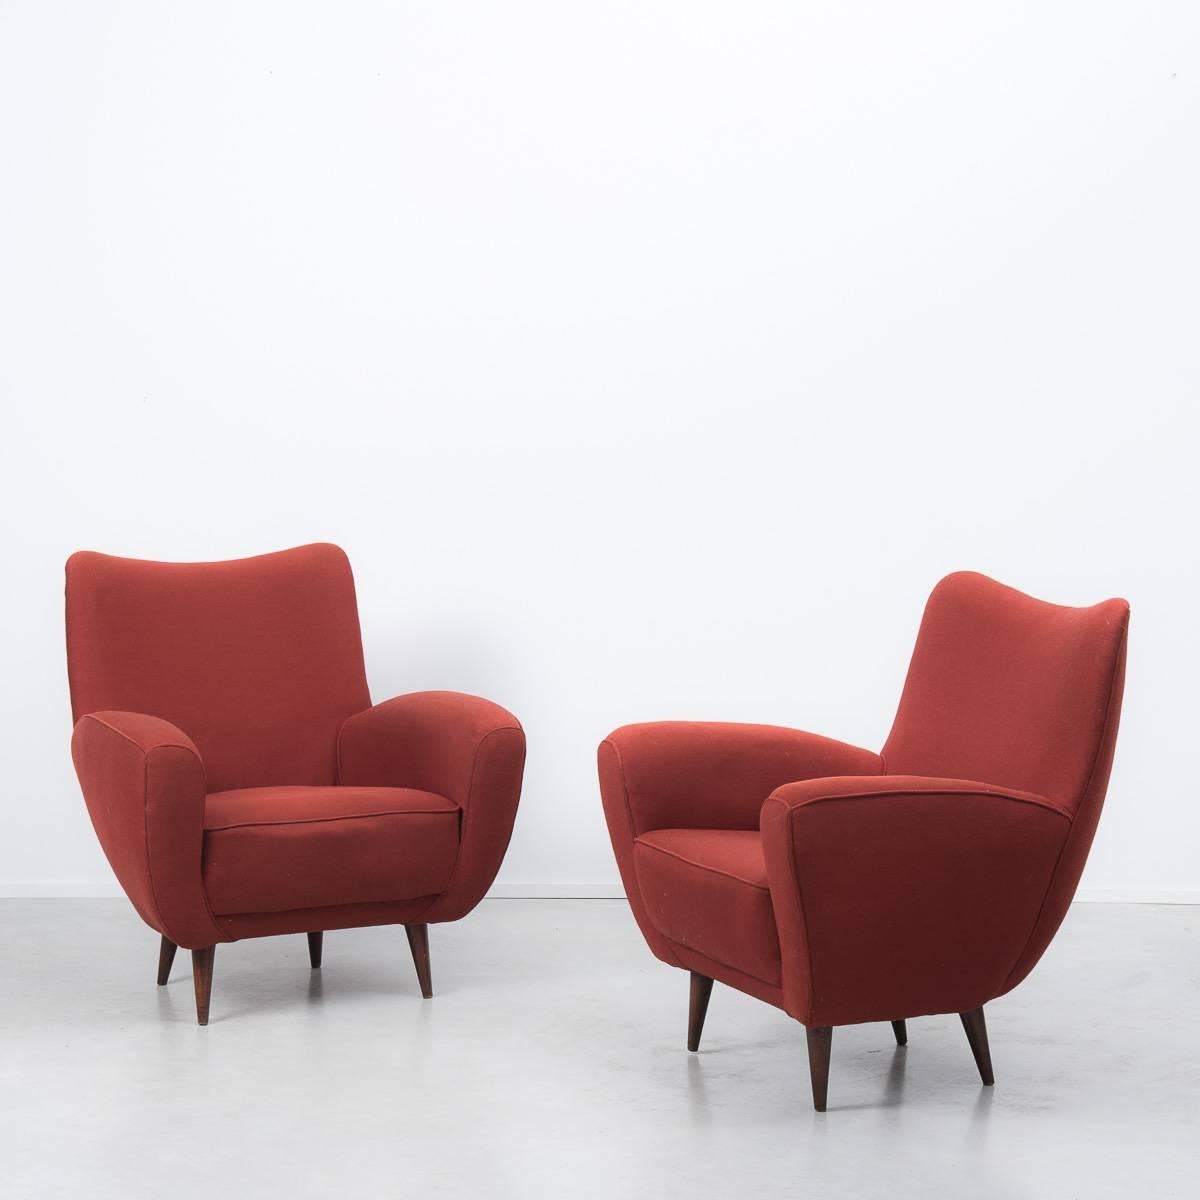 This pair of elegant 1950s Italian upholstered armchairs in the manner of Gio Ponti and Marco Zanuso. Their stylish silhouette is typical of this design period and they are upholstered in original terracotta fabric. In great condition, re-upholstery